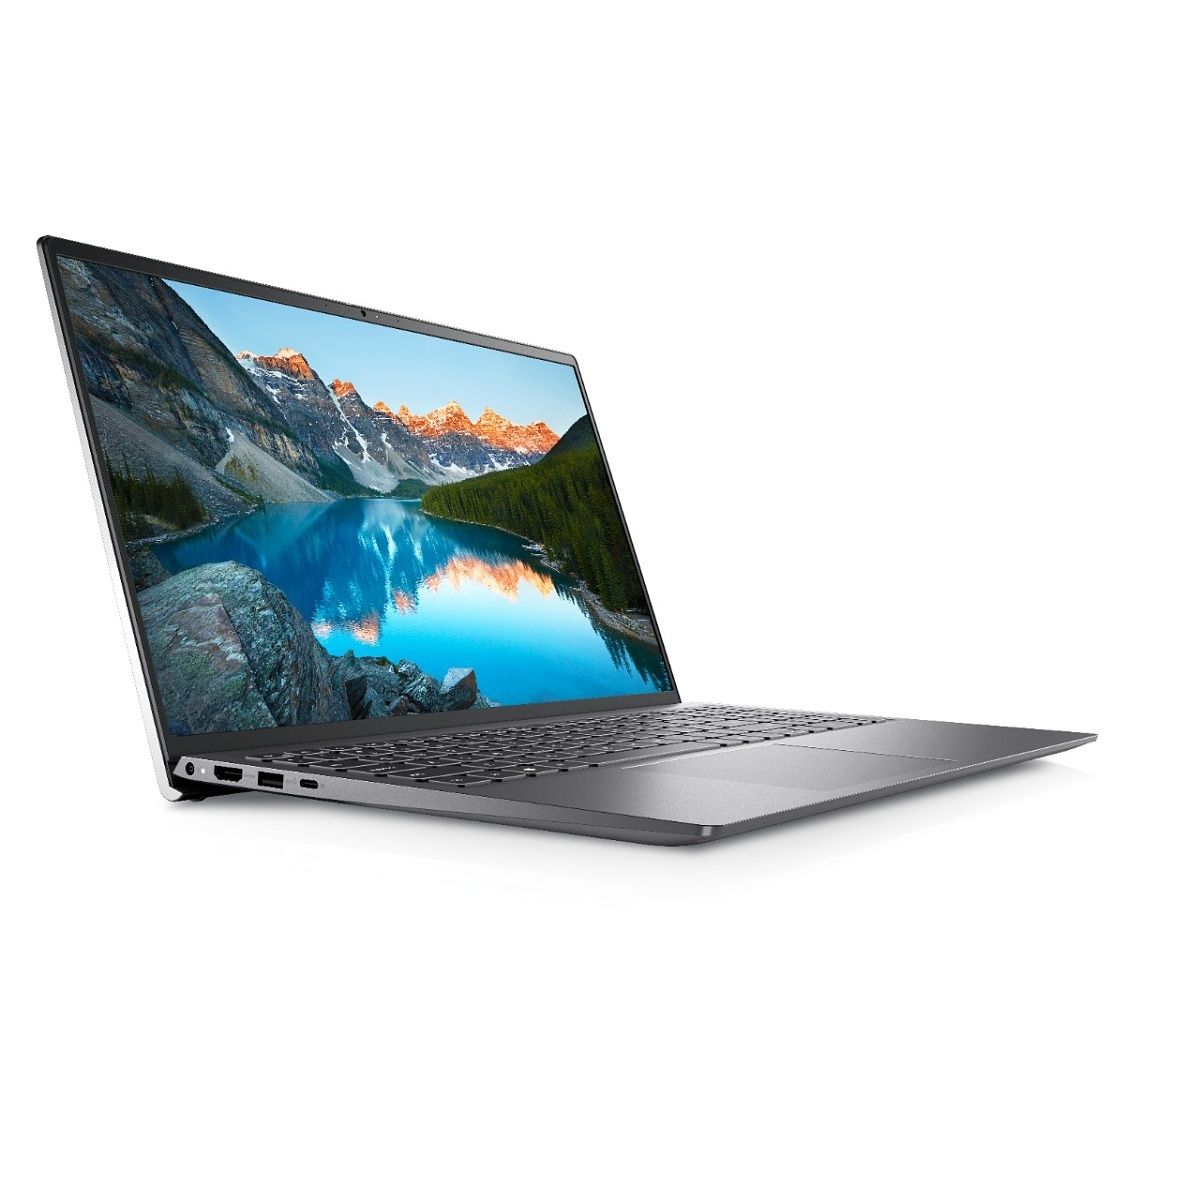 The Dell Inspiron 15 is powered by an Intel Core i5-11320H processor with a 35W TDP, plus 8GB of RAM and 256GB of storage. It's also got a Full HD display for a great overall experience.